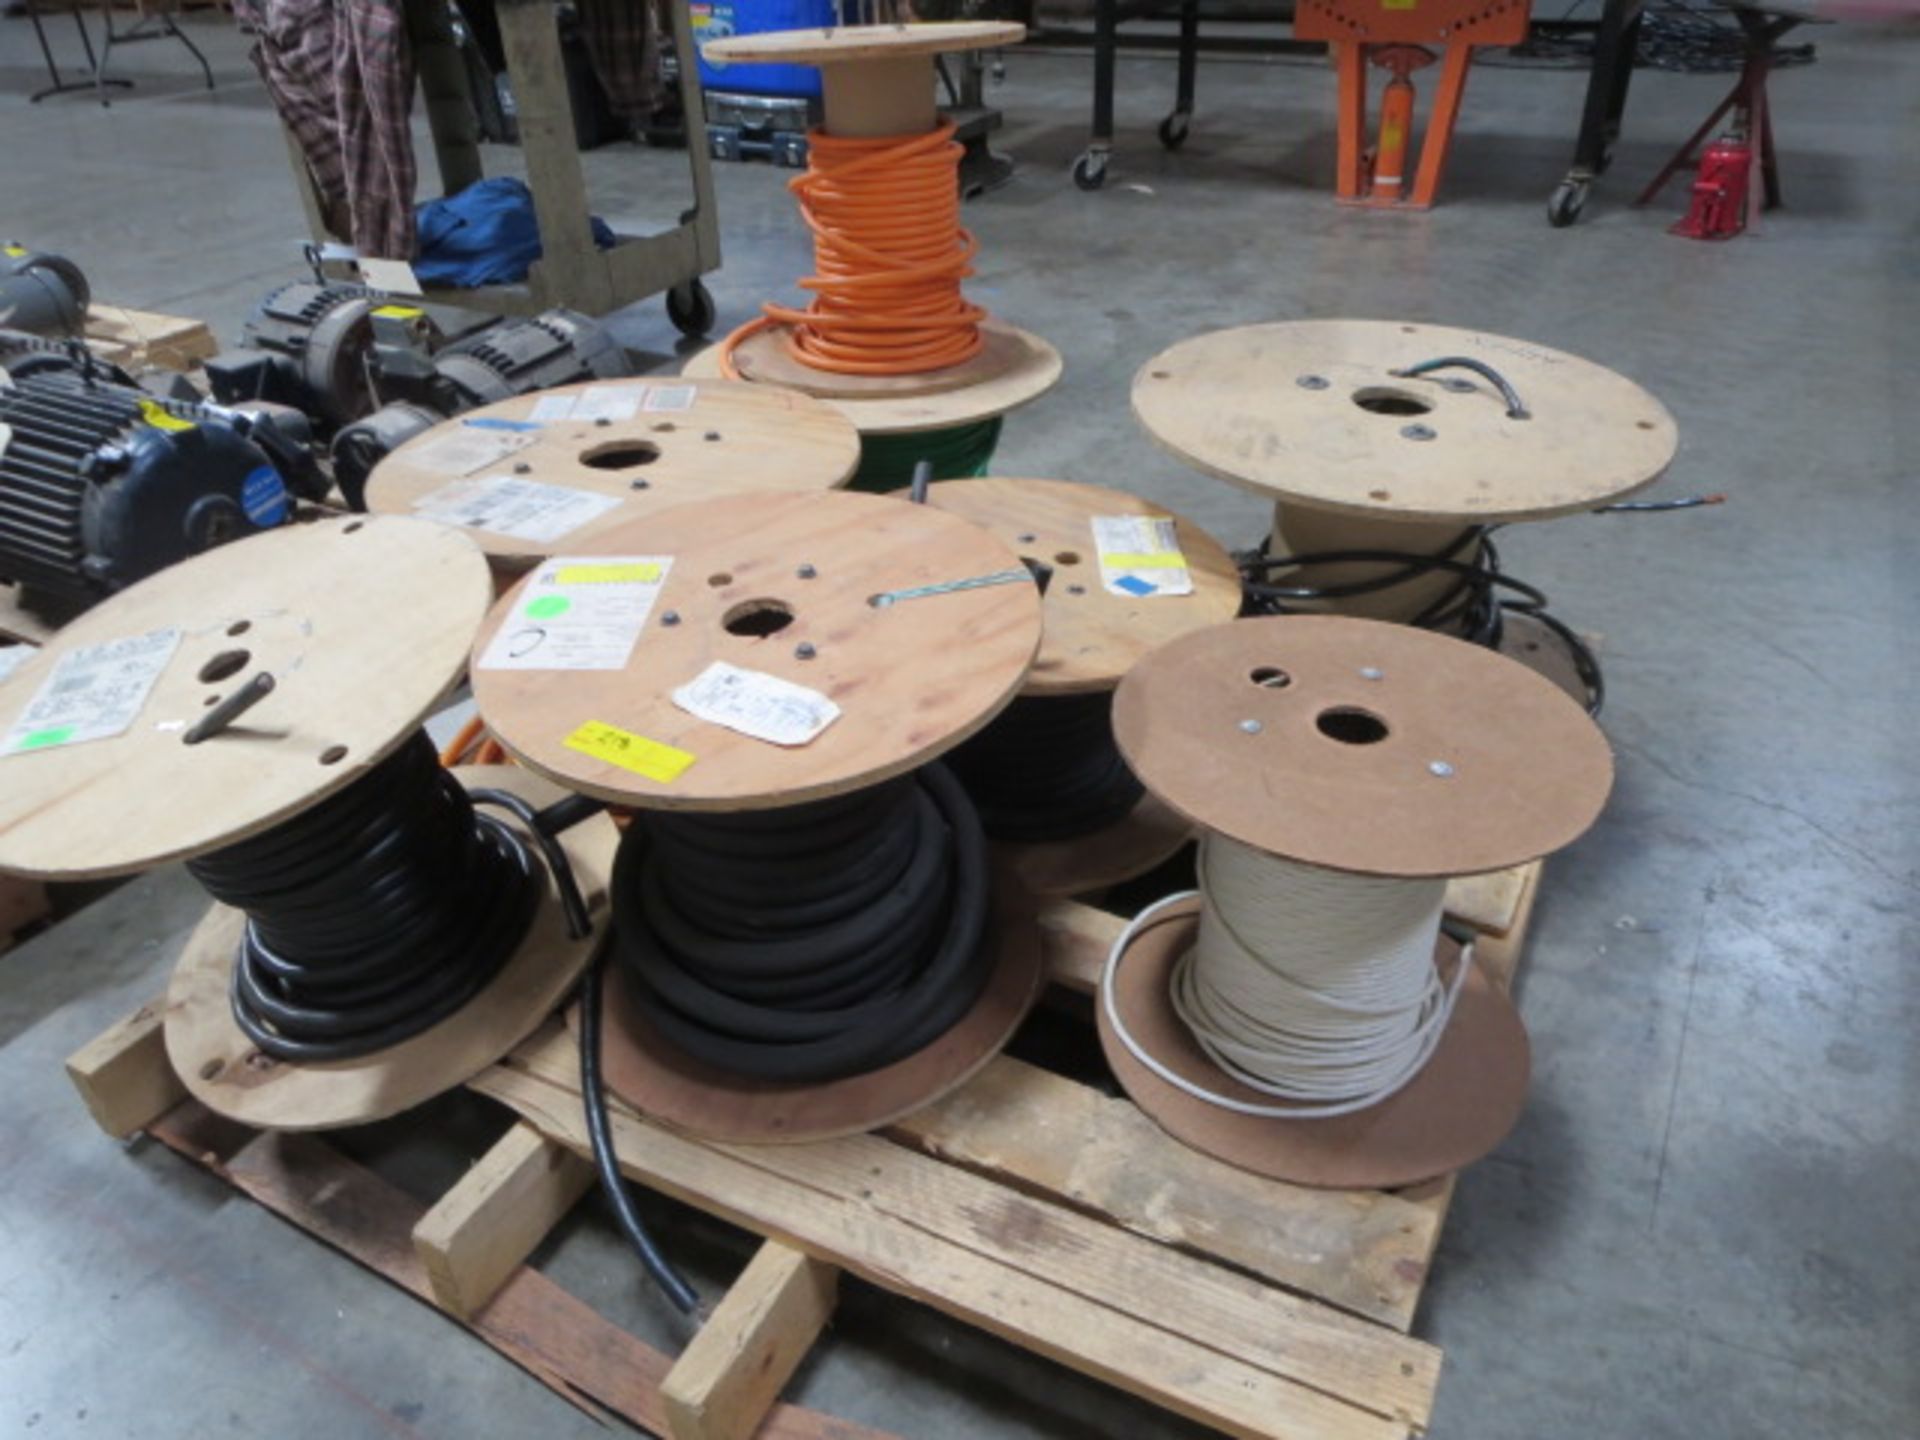 Lot of Partial Spools of Assorted Wires, Contents of Pallet